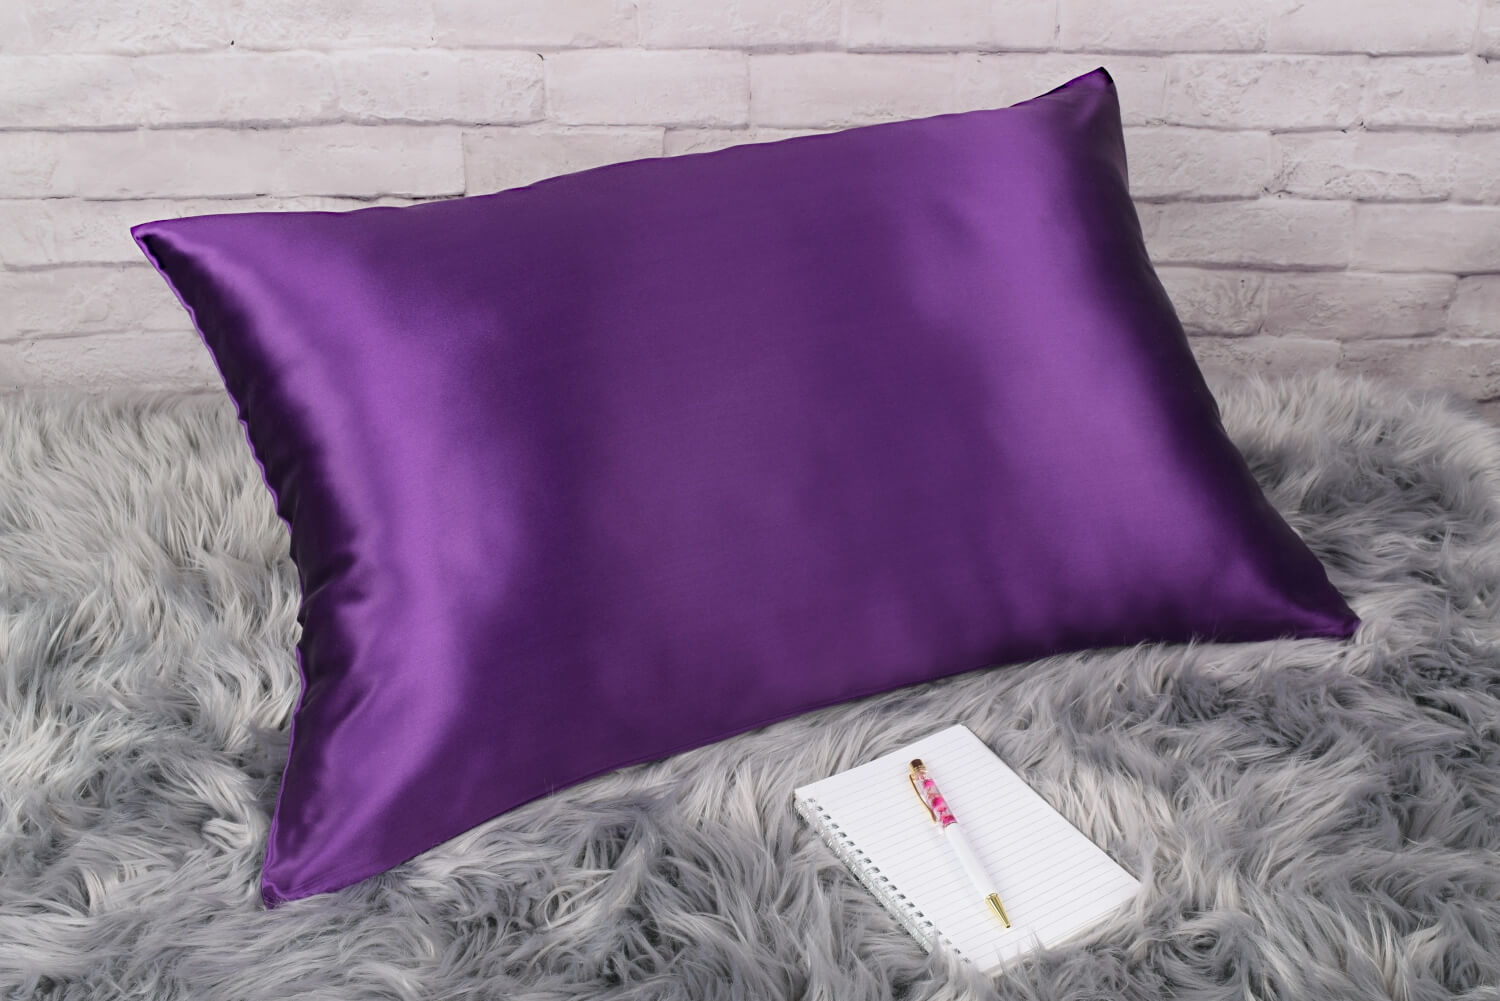 Celestial Silk Plum 25 momme Silk Pillowcase on rug with notebook and pretty pen